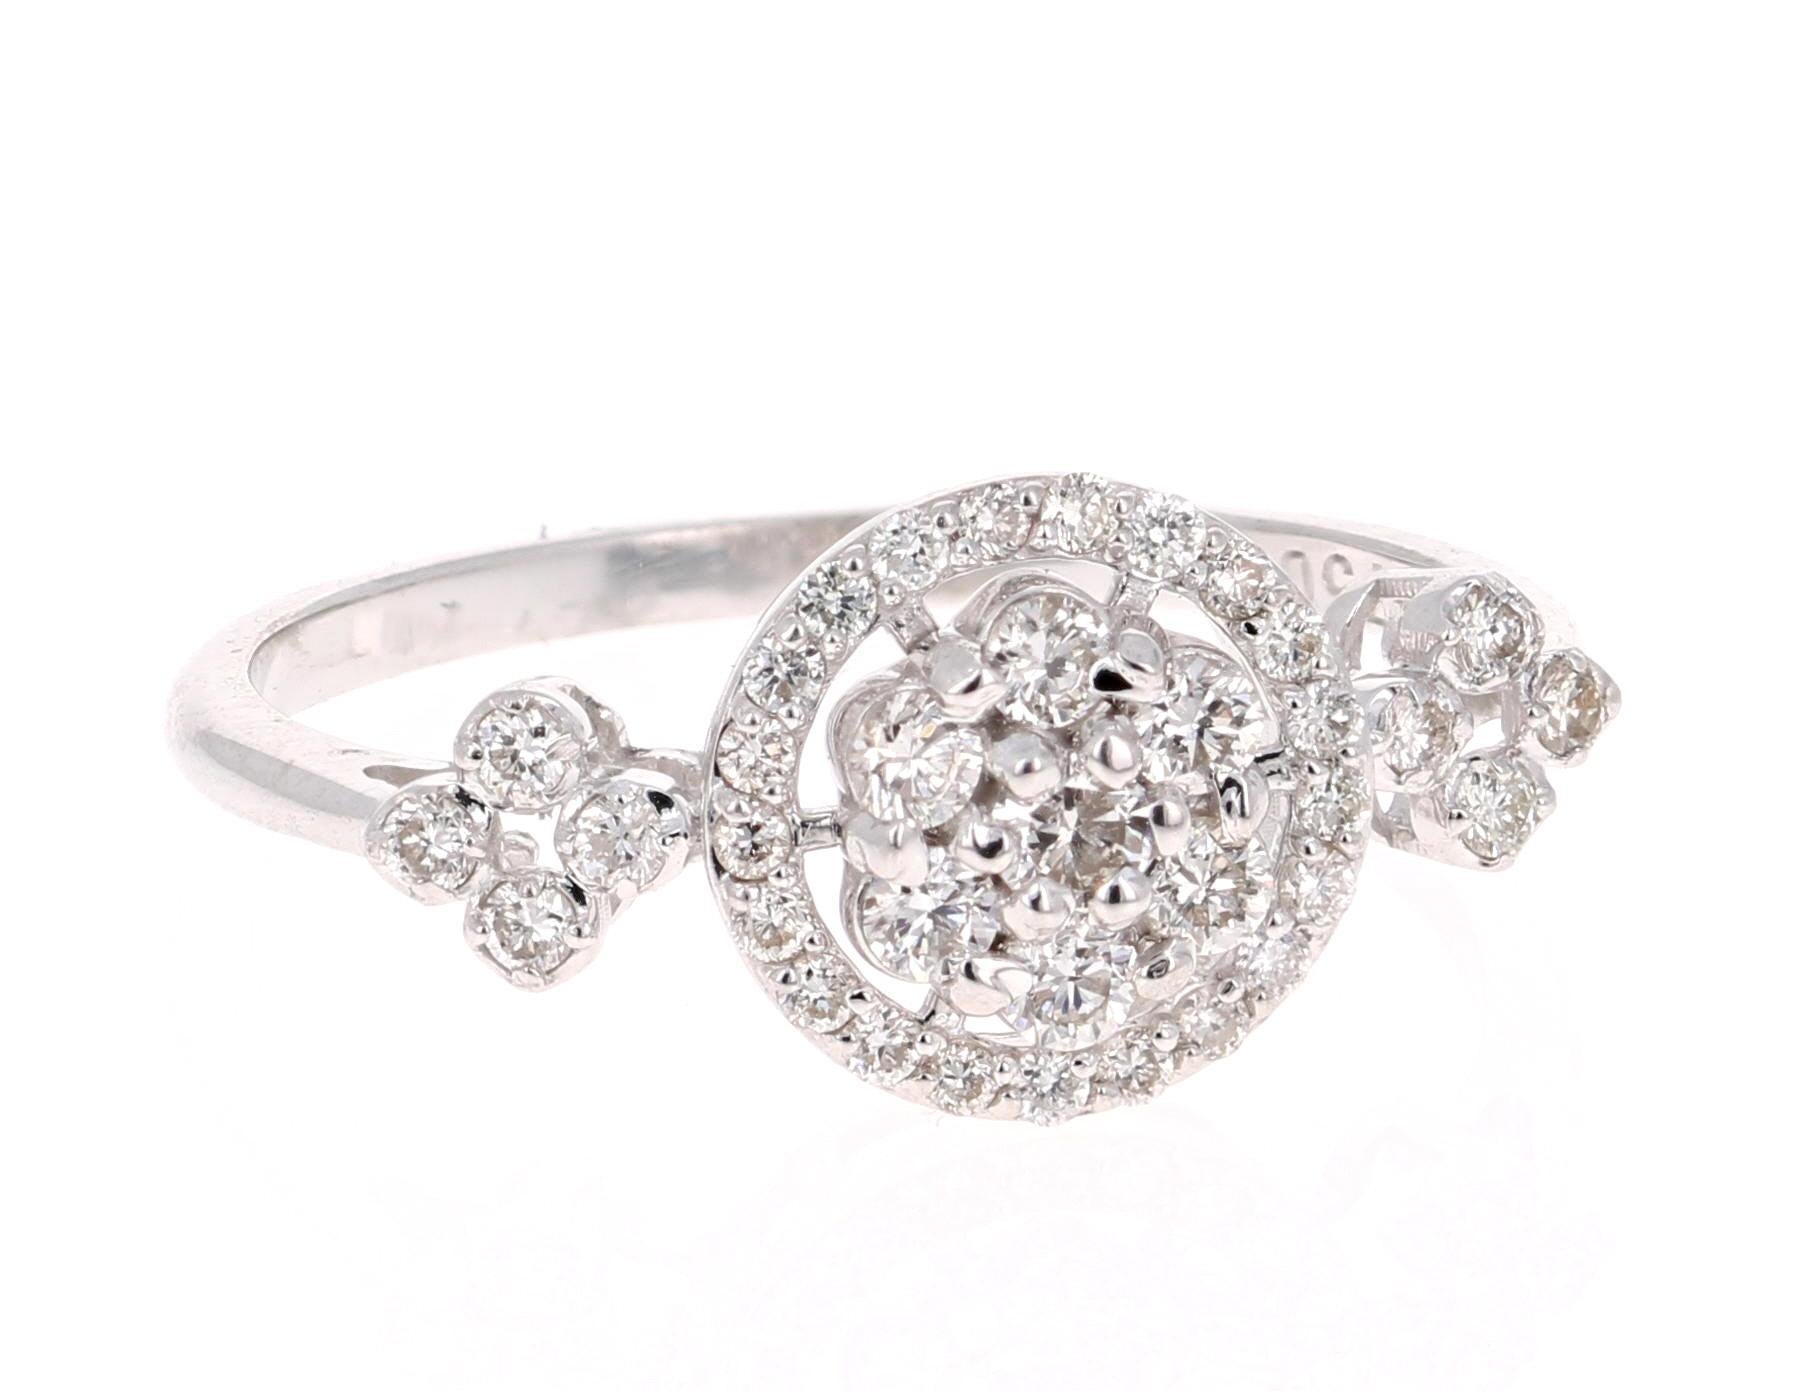 A cute and dainty diamond cluster ring!

The ring has 36 Round Cut Diamonds that weigh 0.43 Carats. The clarity and color of the diamonds are VS2-H. 

It is set in 18K White Gold and is 2.3 grams. The ring size is a 6.5 and can be resized if needed